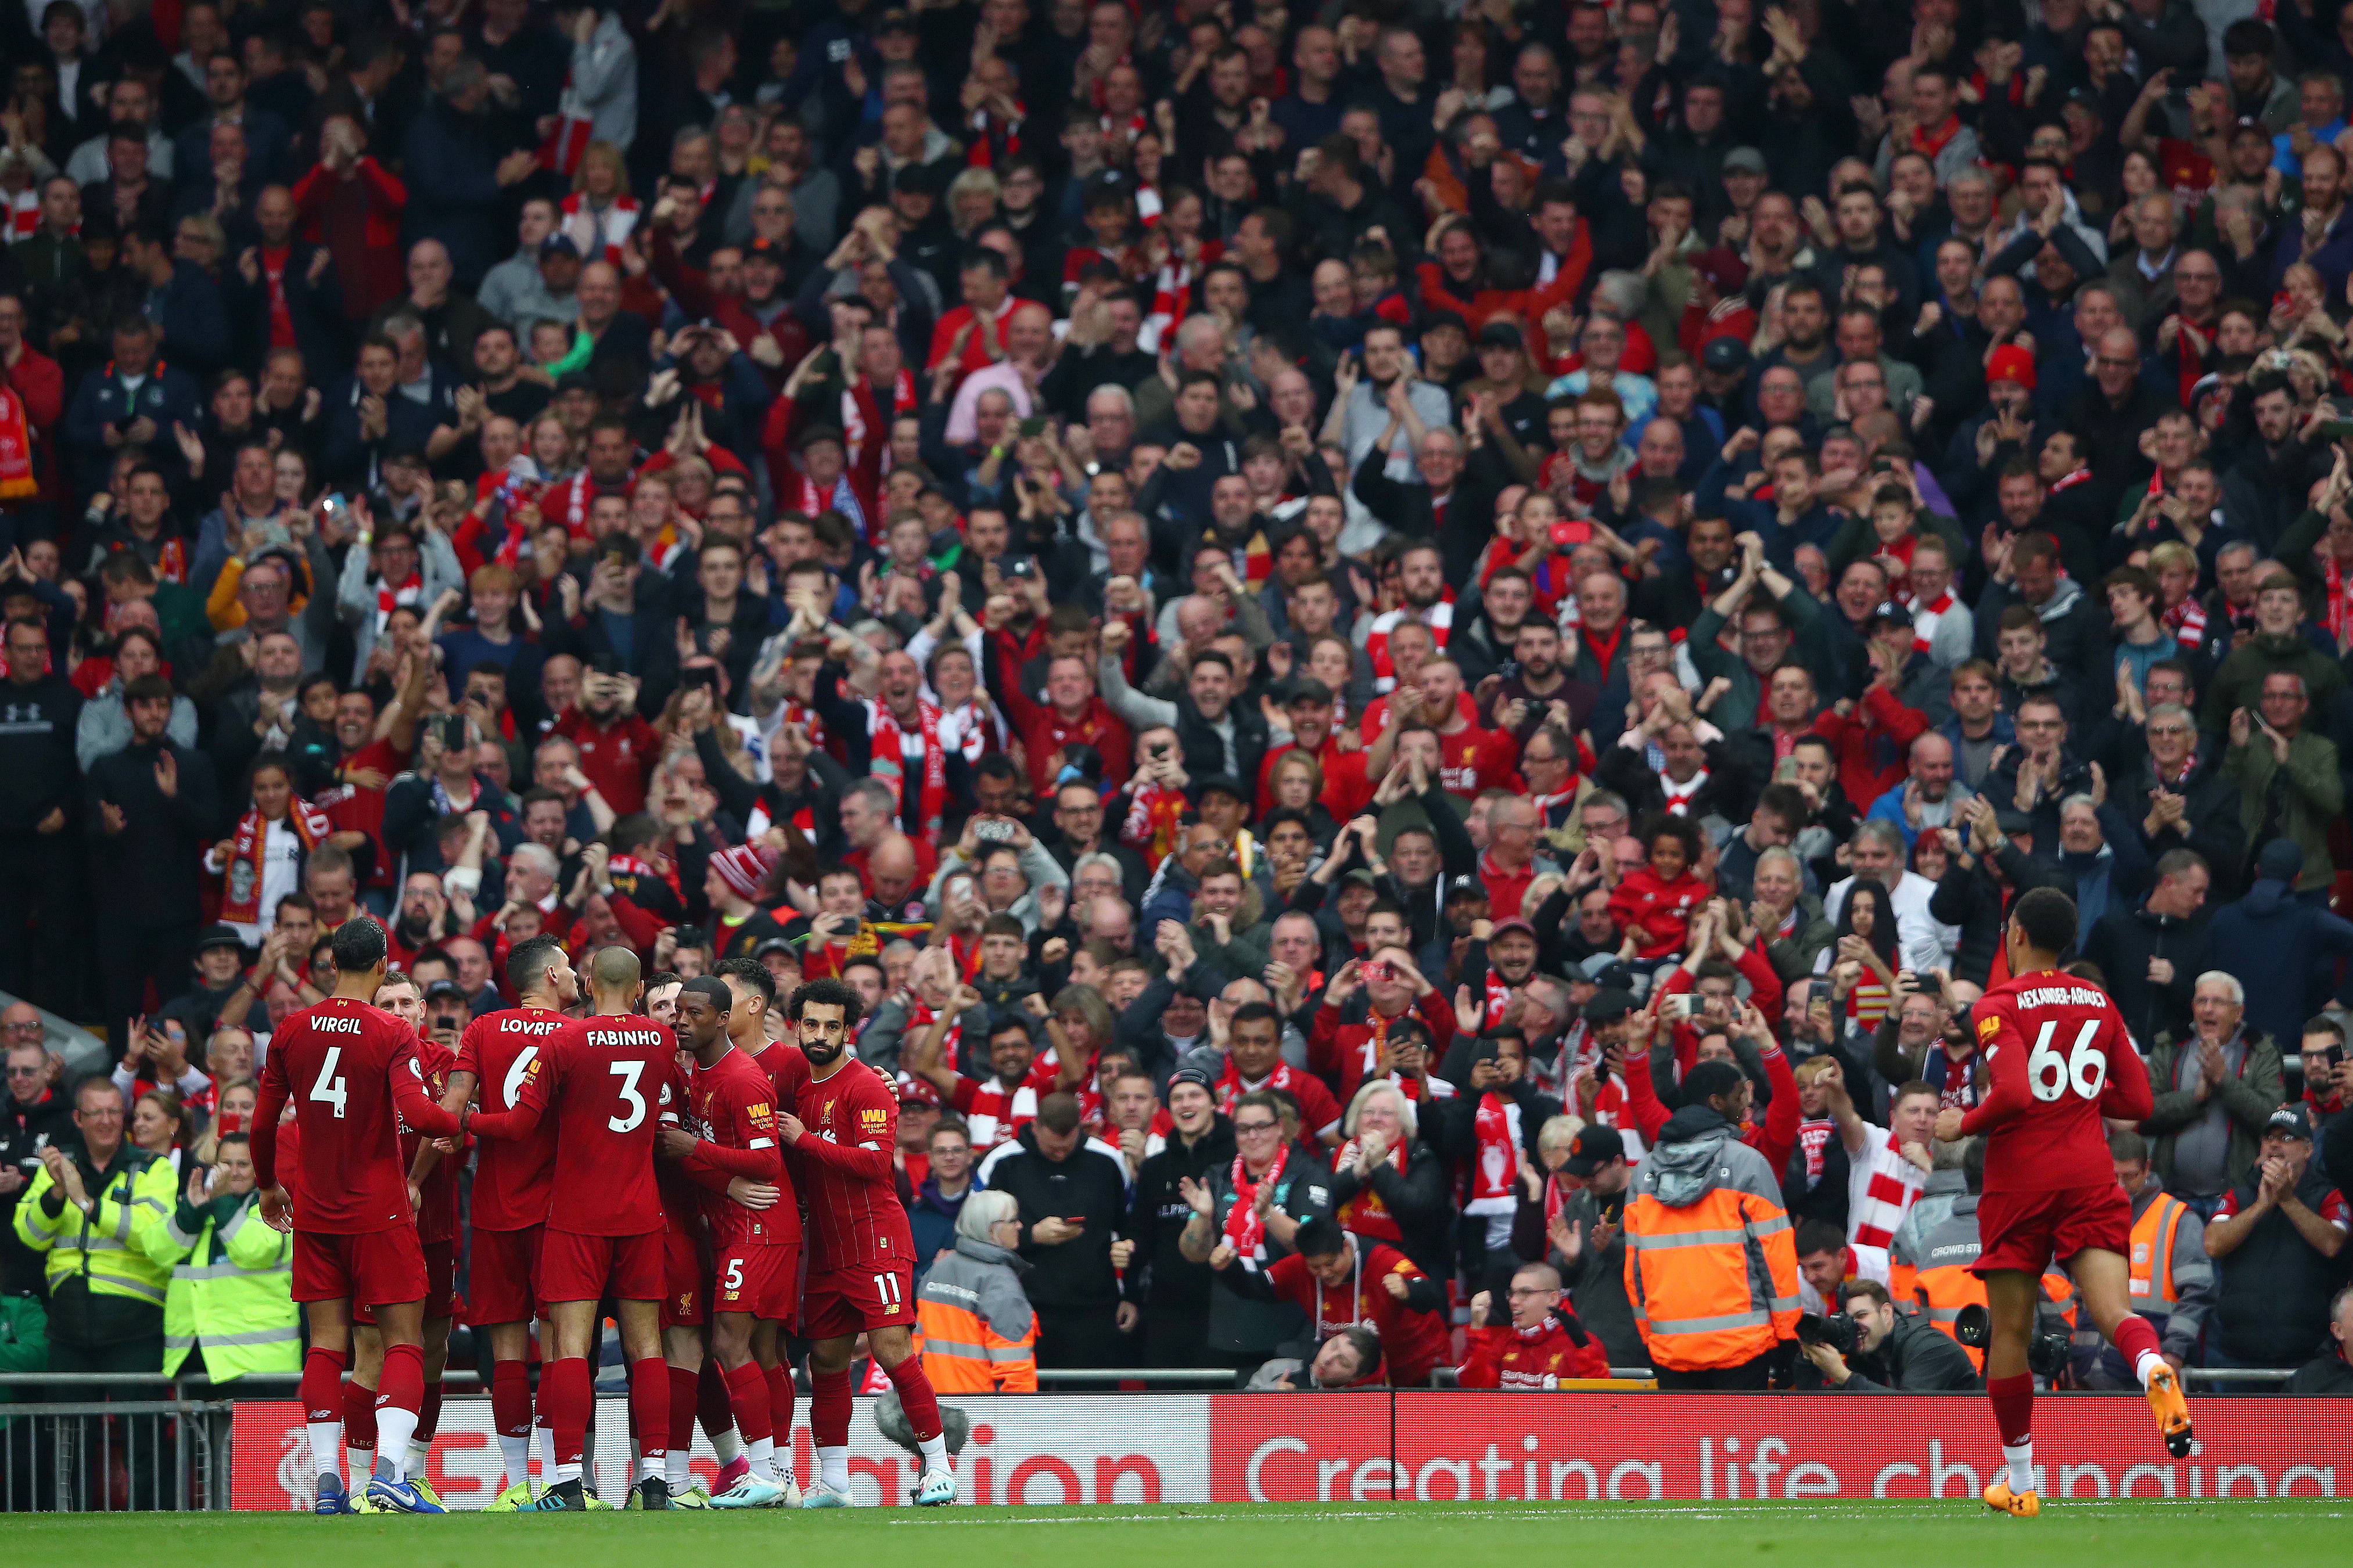 The Enfield rings with the sound YNWA. (Photo by Clive Brunskill/Getty Images)